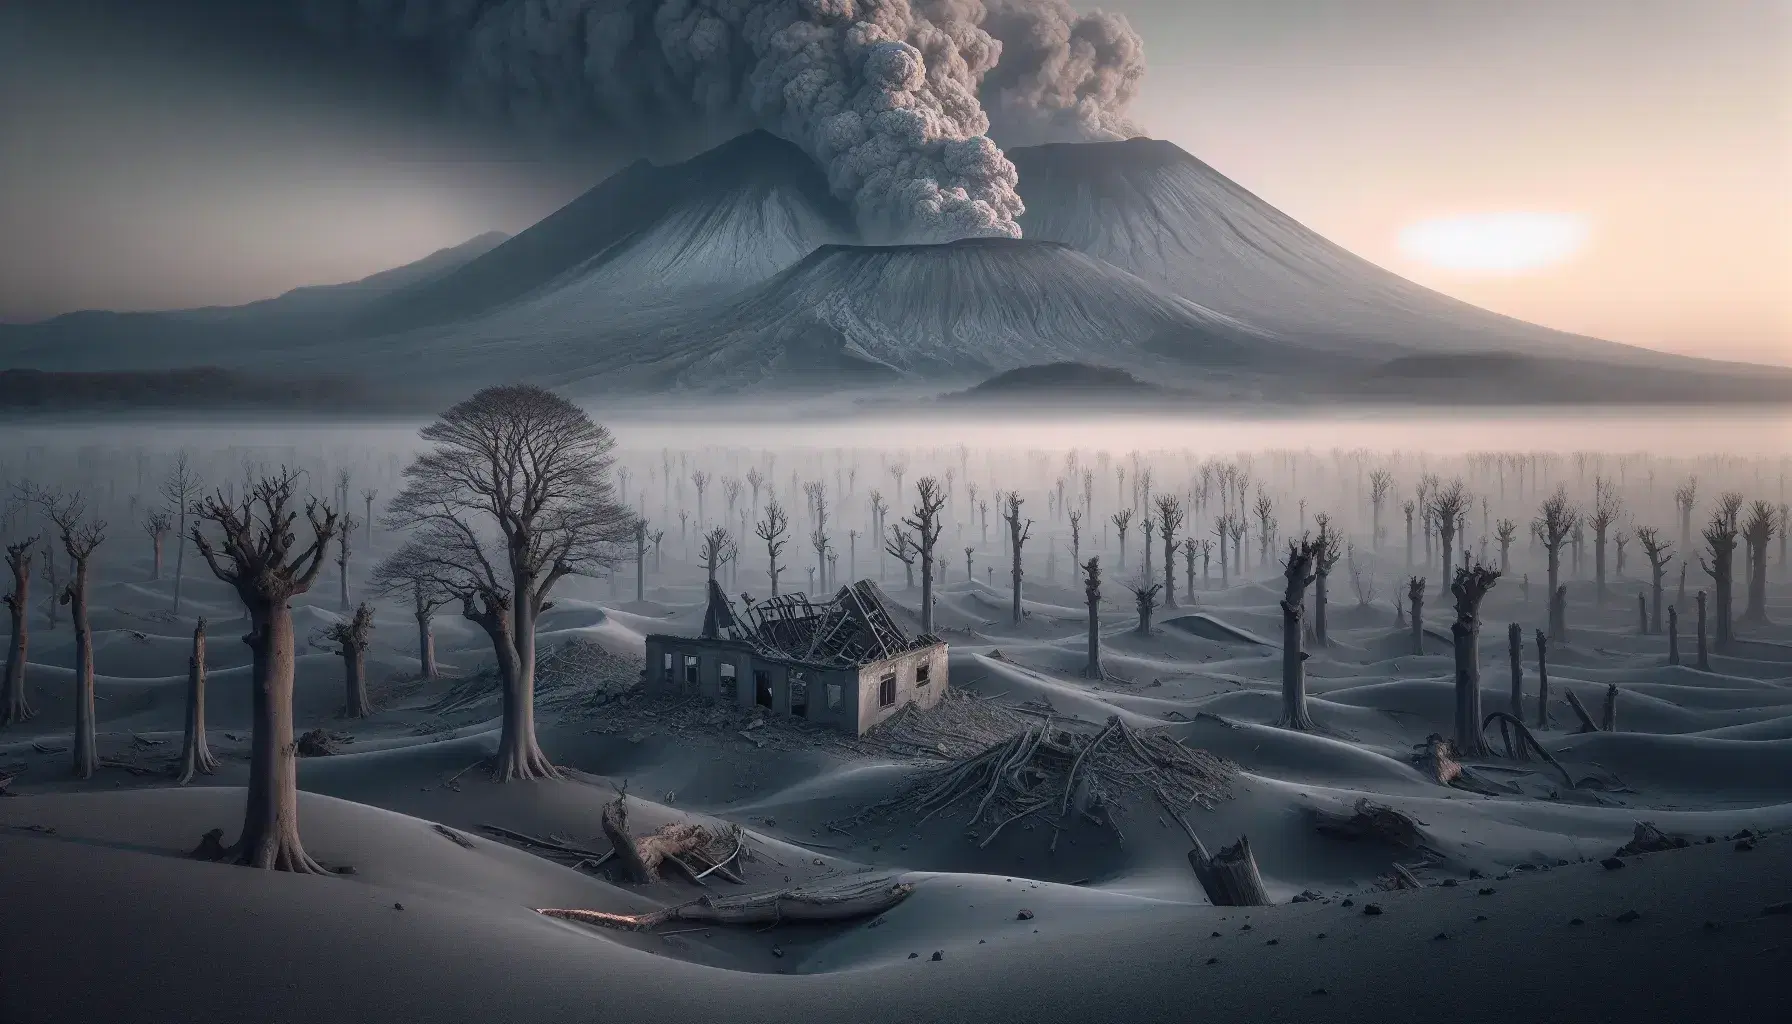 Post-volcanic eruption landscape with gray ash on the ground, bare trees, damaged building and stratovolcano with smoke column.